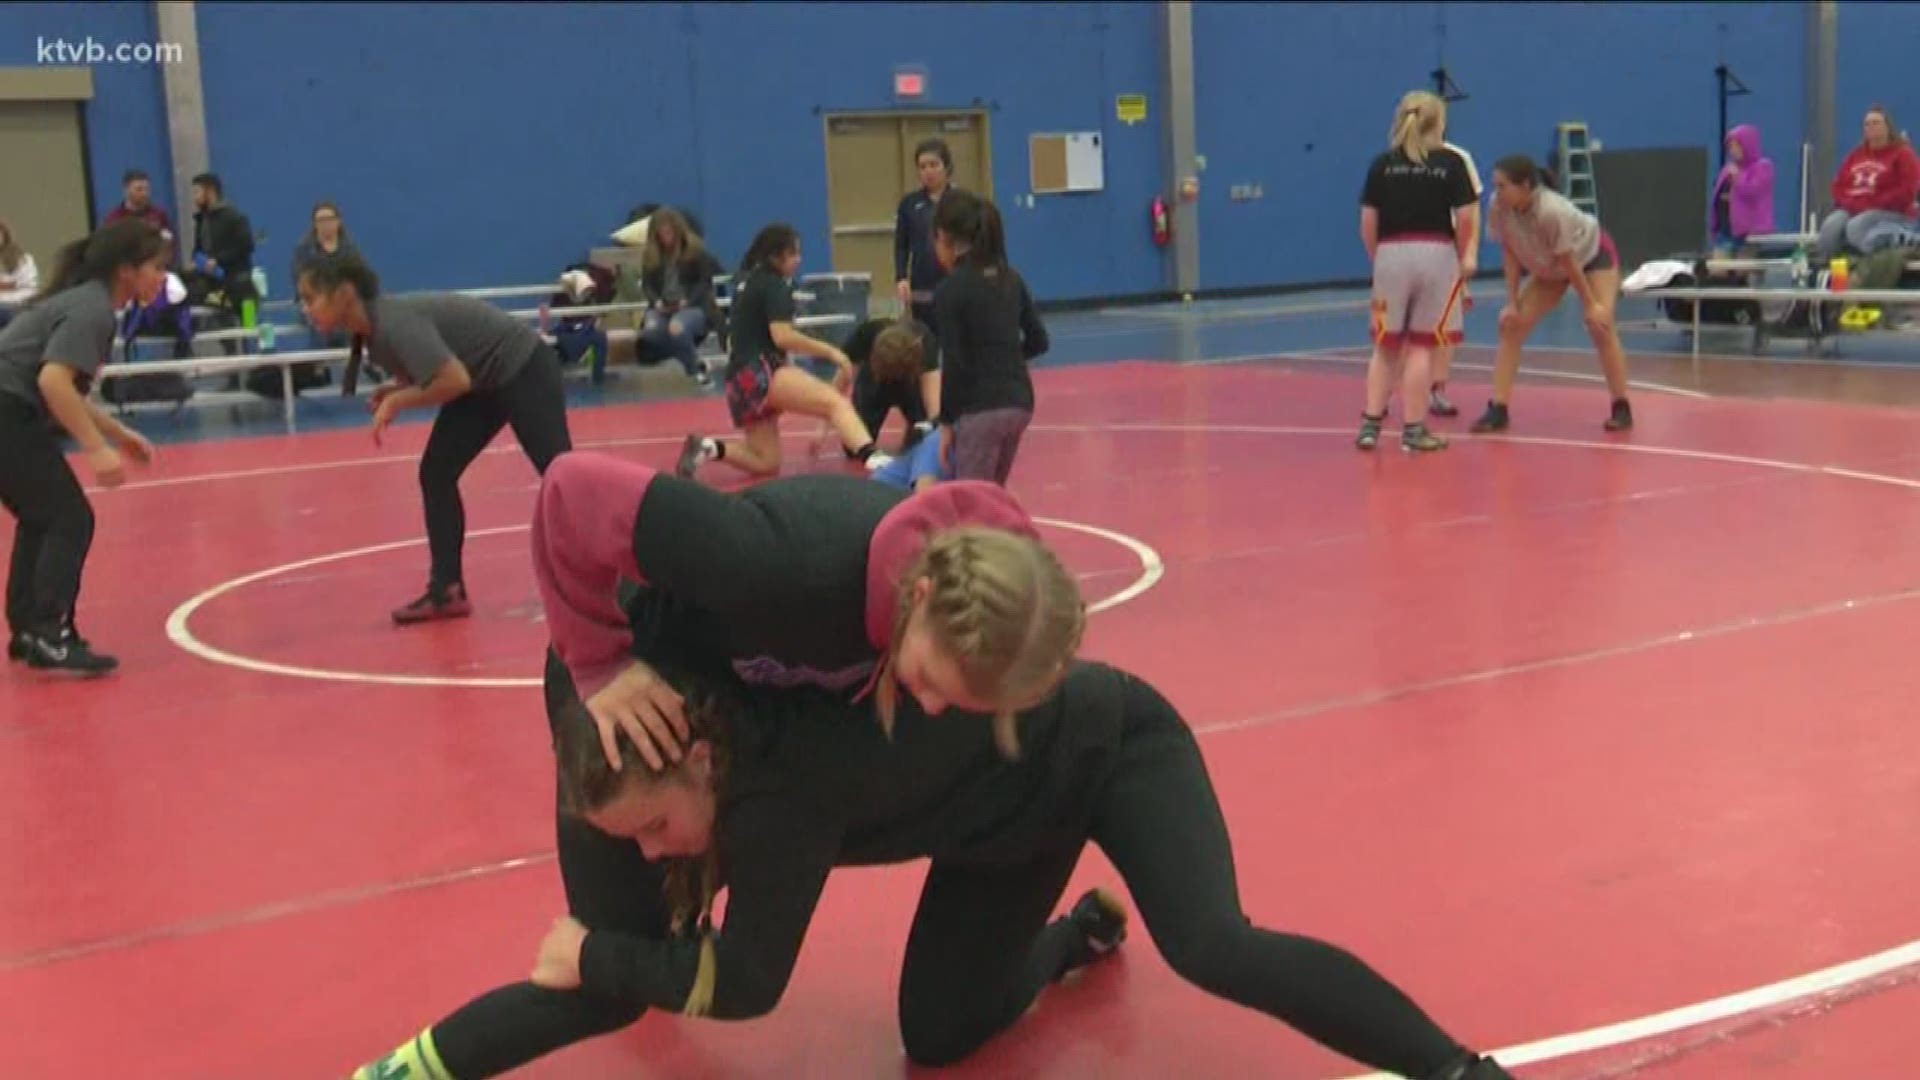 Northwest Nazarene University in Nampa is hosting an all-girls wrestling tournament this weekend.